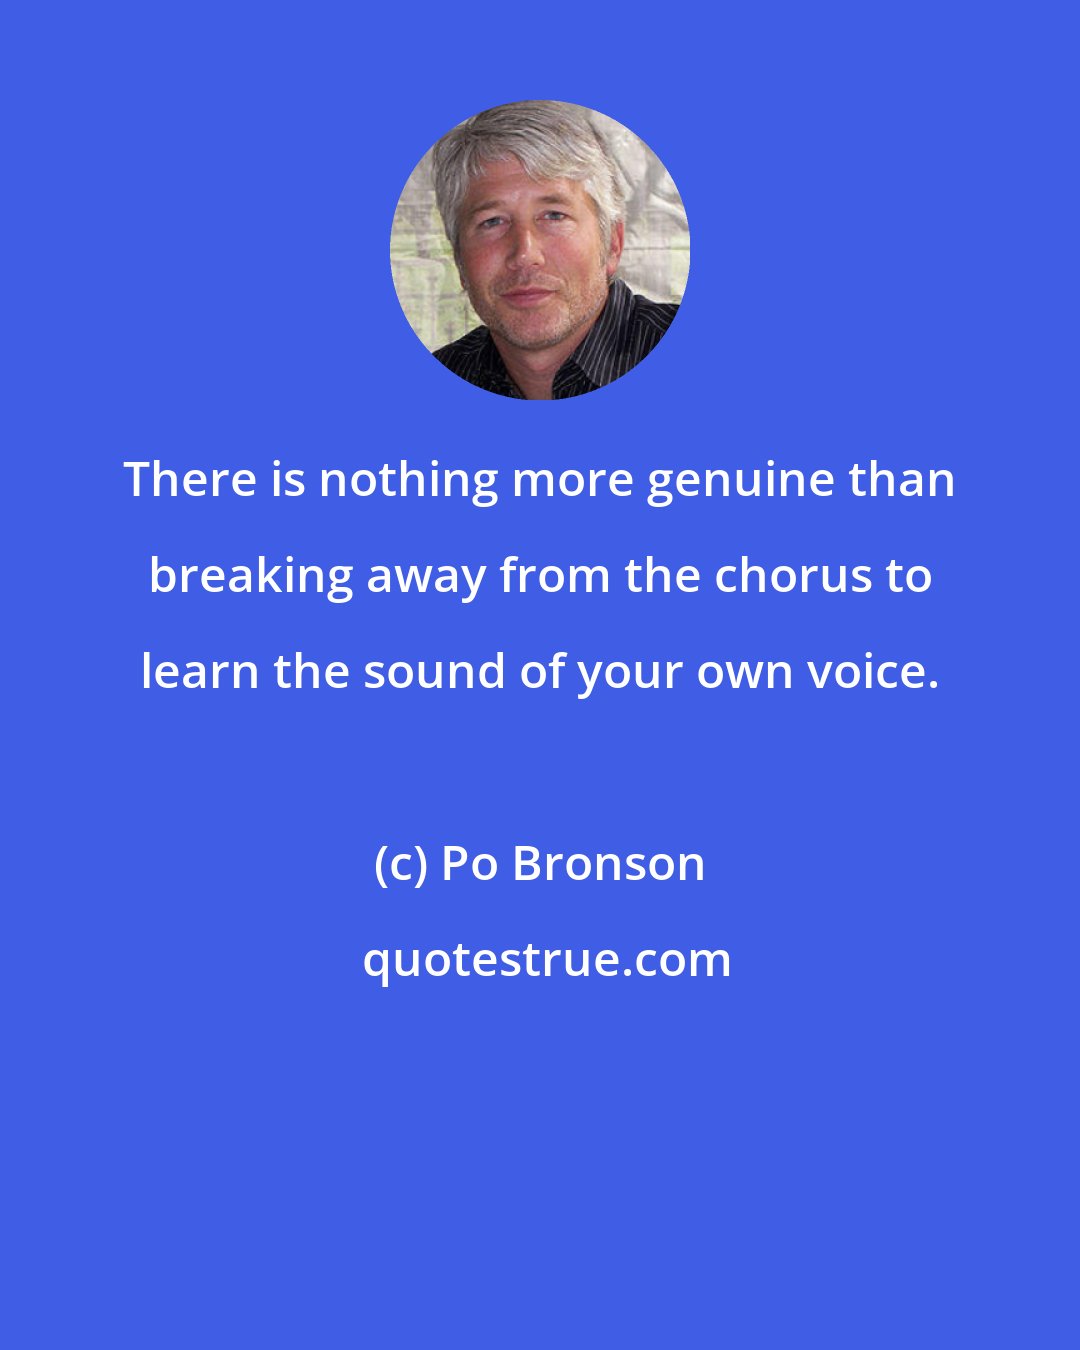 Po Bronson: There is nothing more genuine than breaking away from the chorus to learn the sound of your own voice.